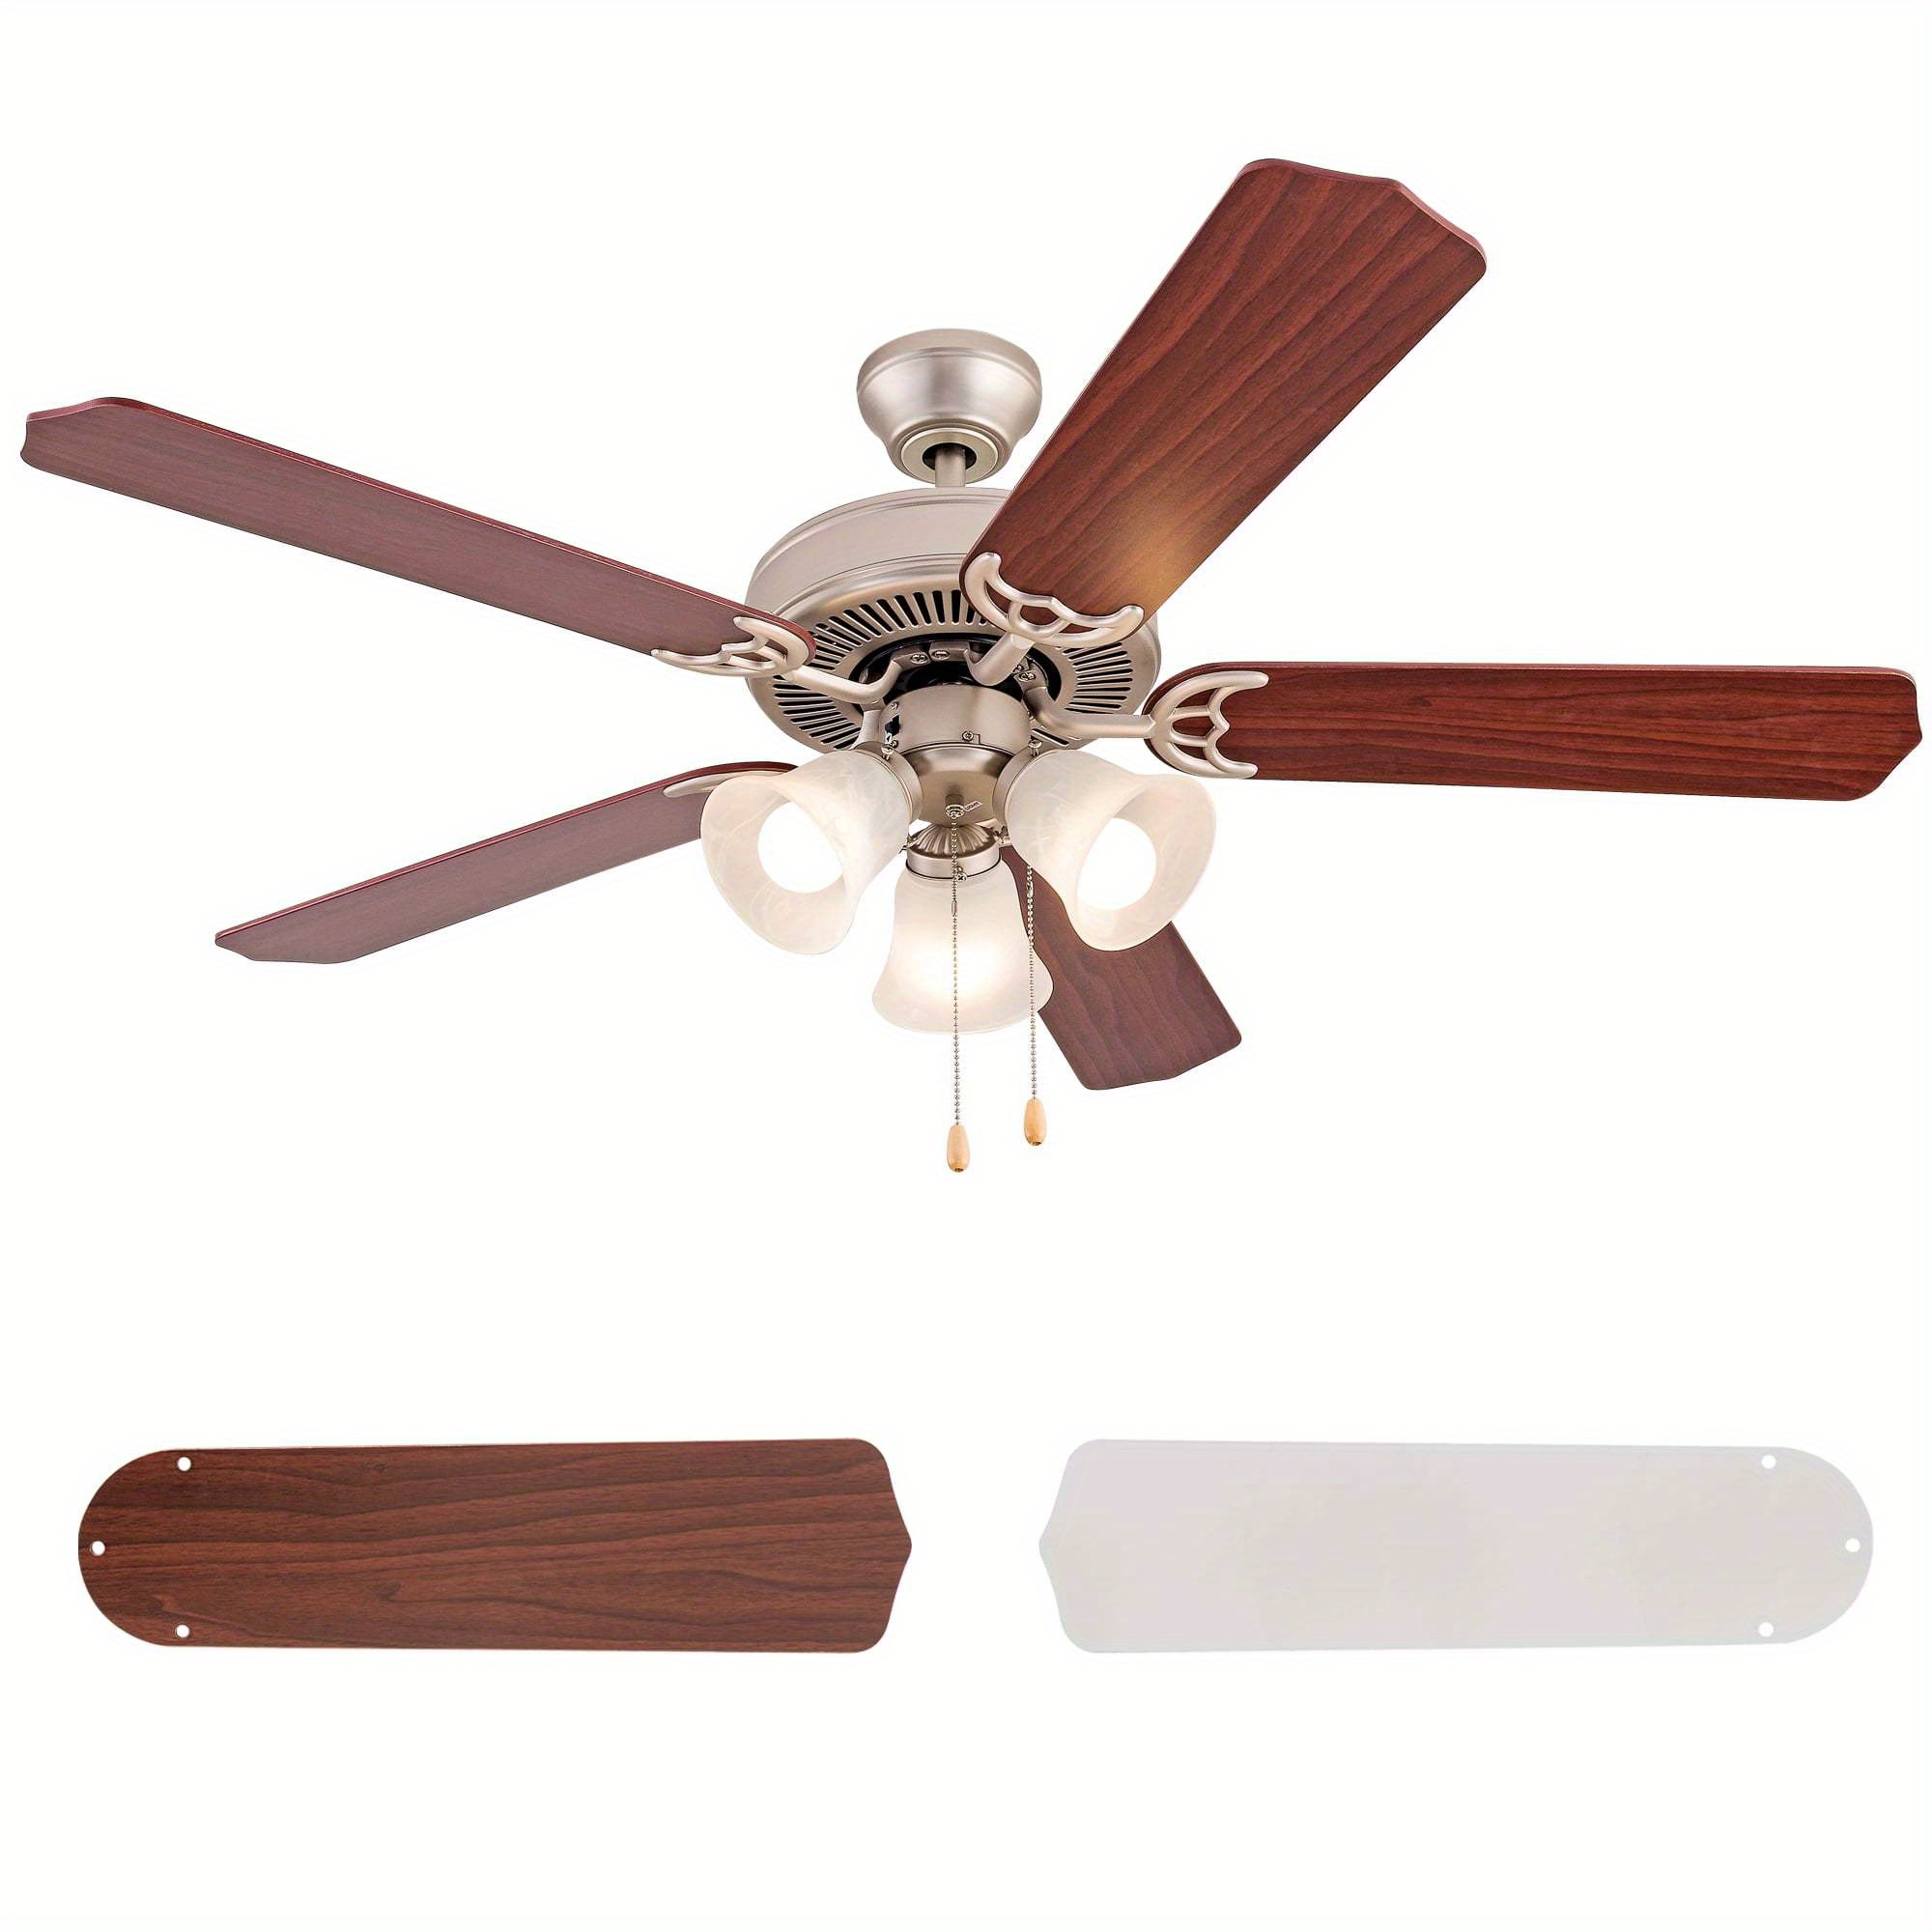 

52" Vintage Indoor Ceiling Fan With 3 Led Lights, Pull Chain Control, Reversible Ac Motor, Walnut/silver Reversible Blades And Satin Nickel Finish